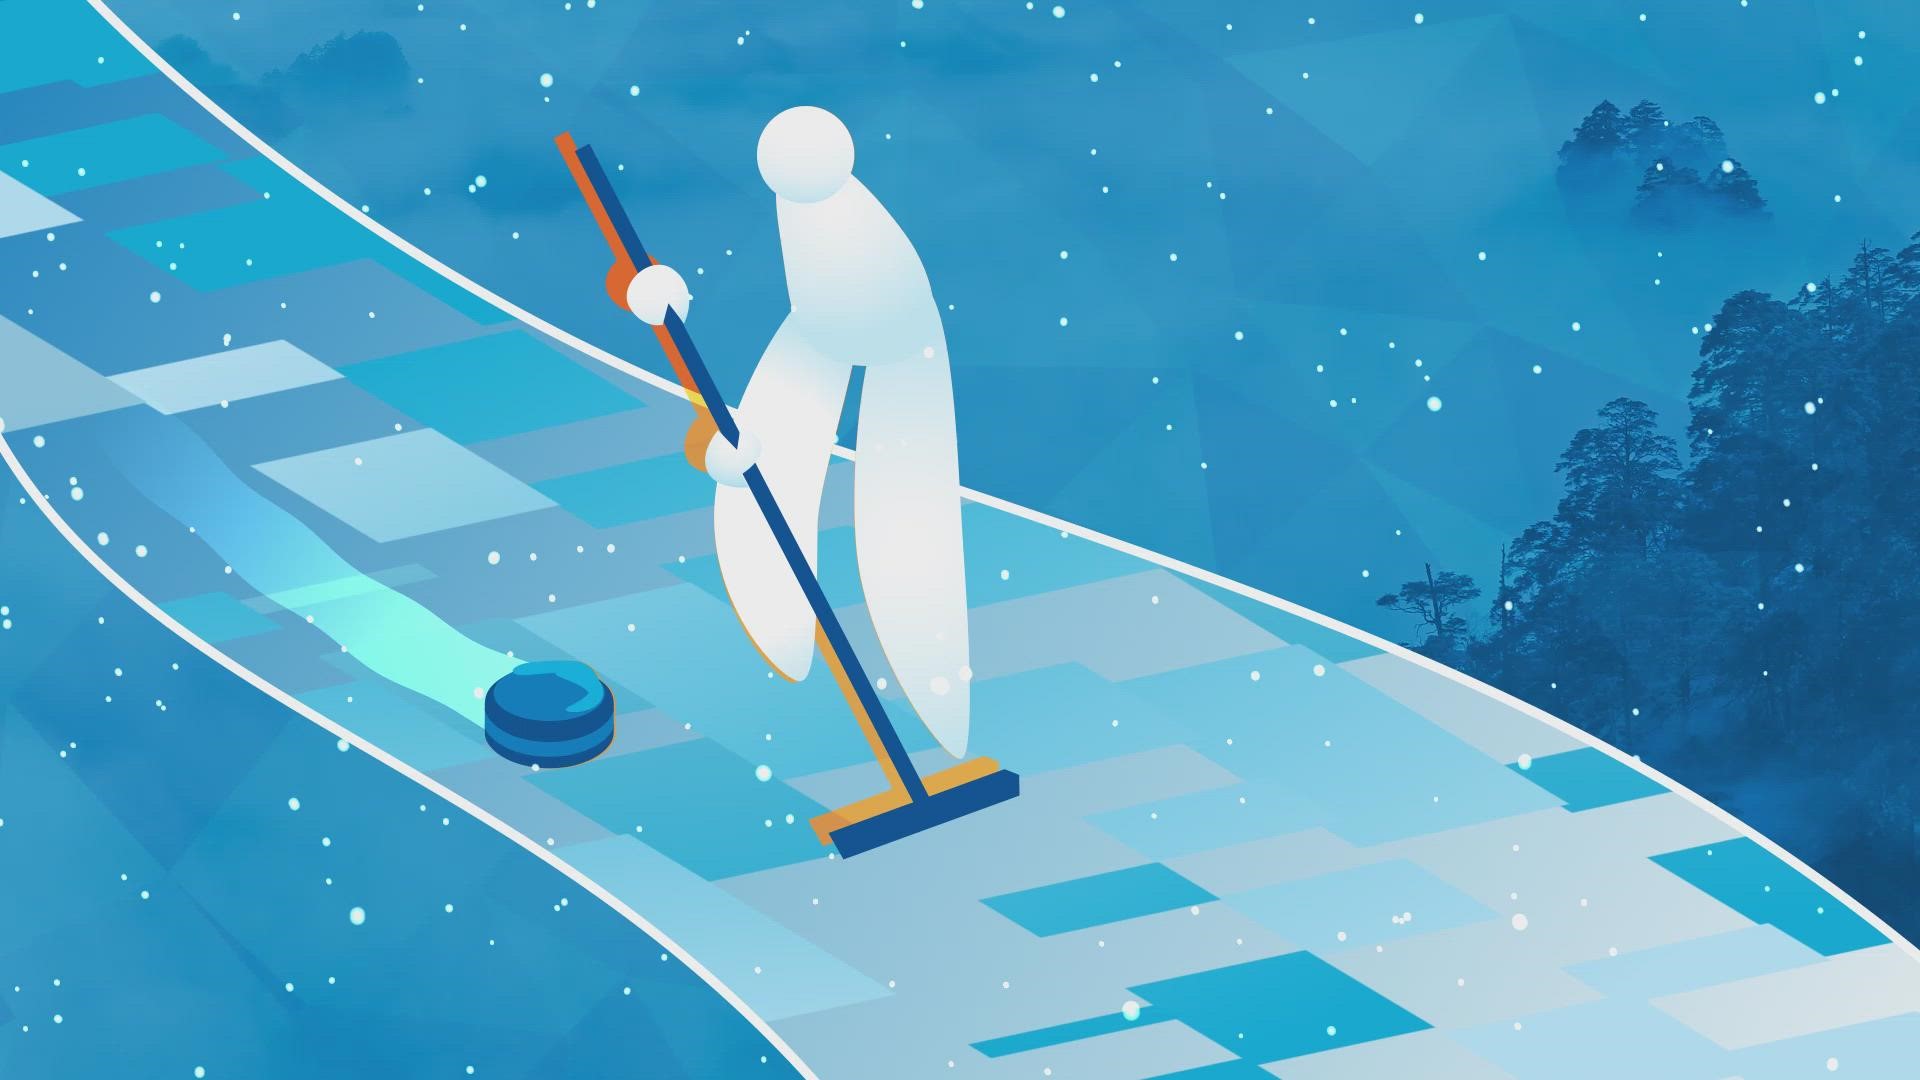 From sheet to shot rock, house to hammer. Here are some terms to know when watching curling at the Winter Olympics.